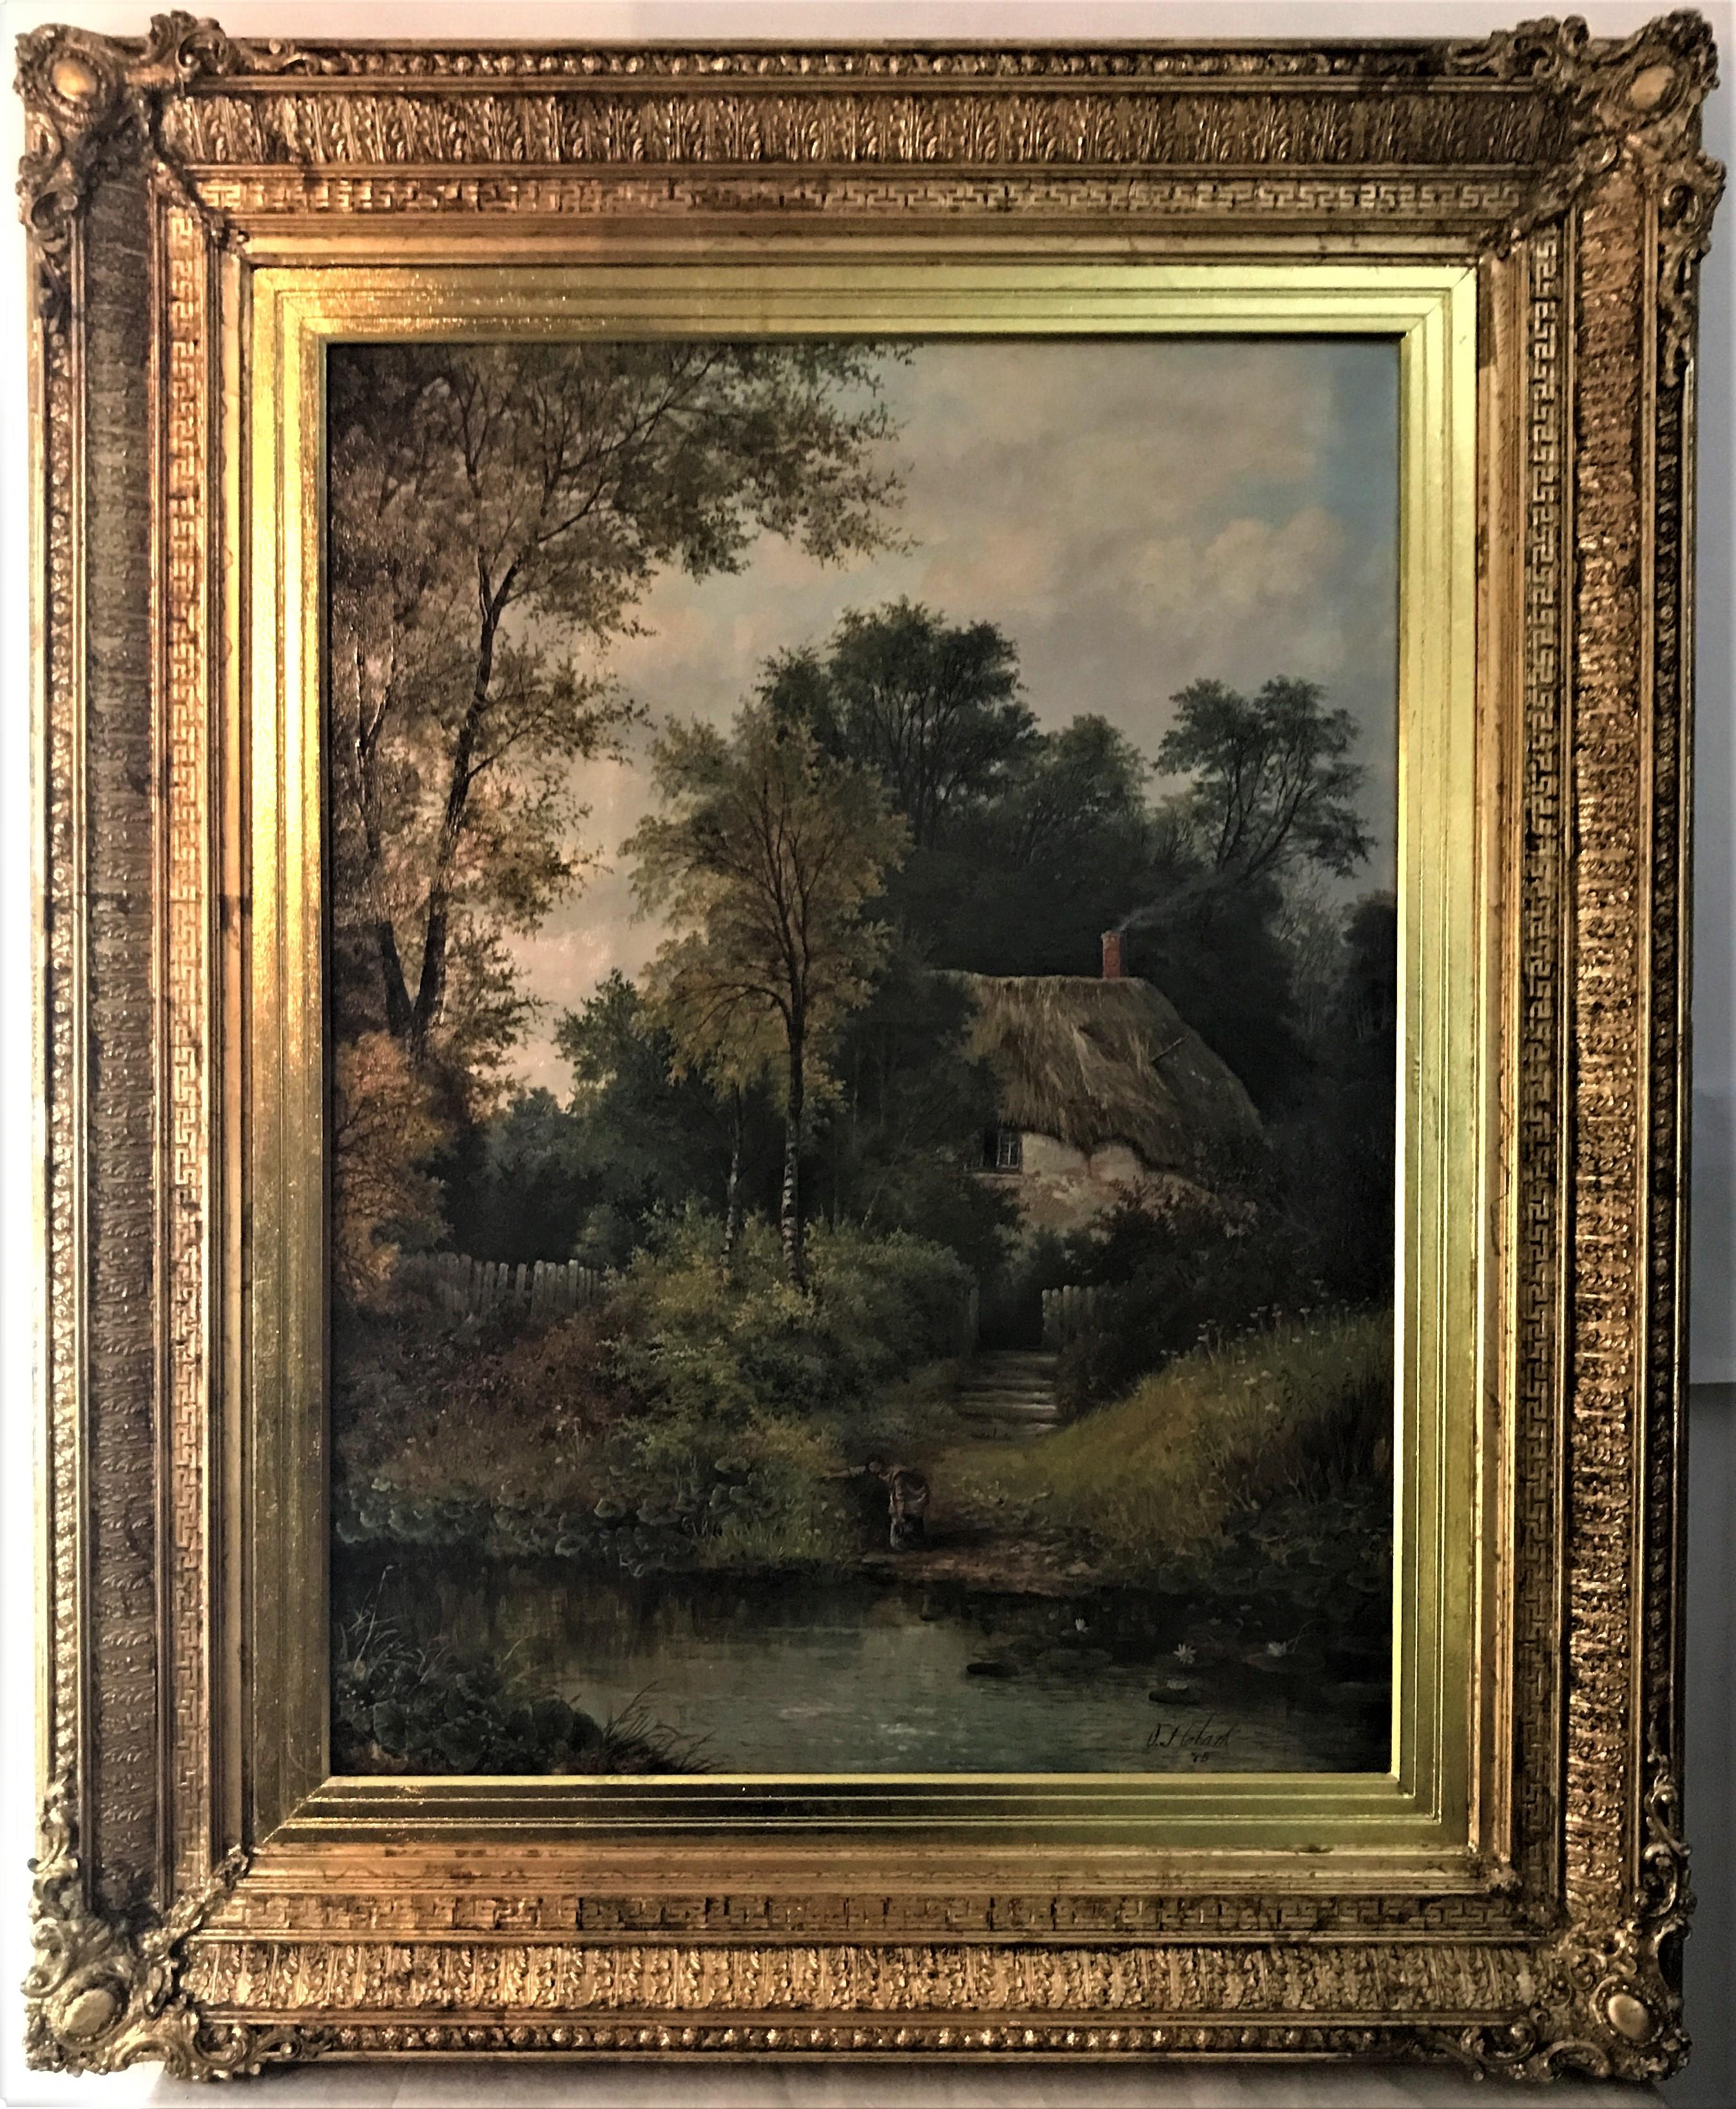 A Rural Cottage by a Stream, 19thC signed English artist, original oil on canvas